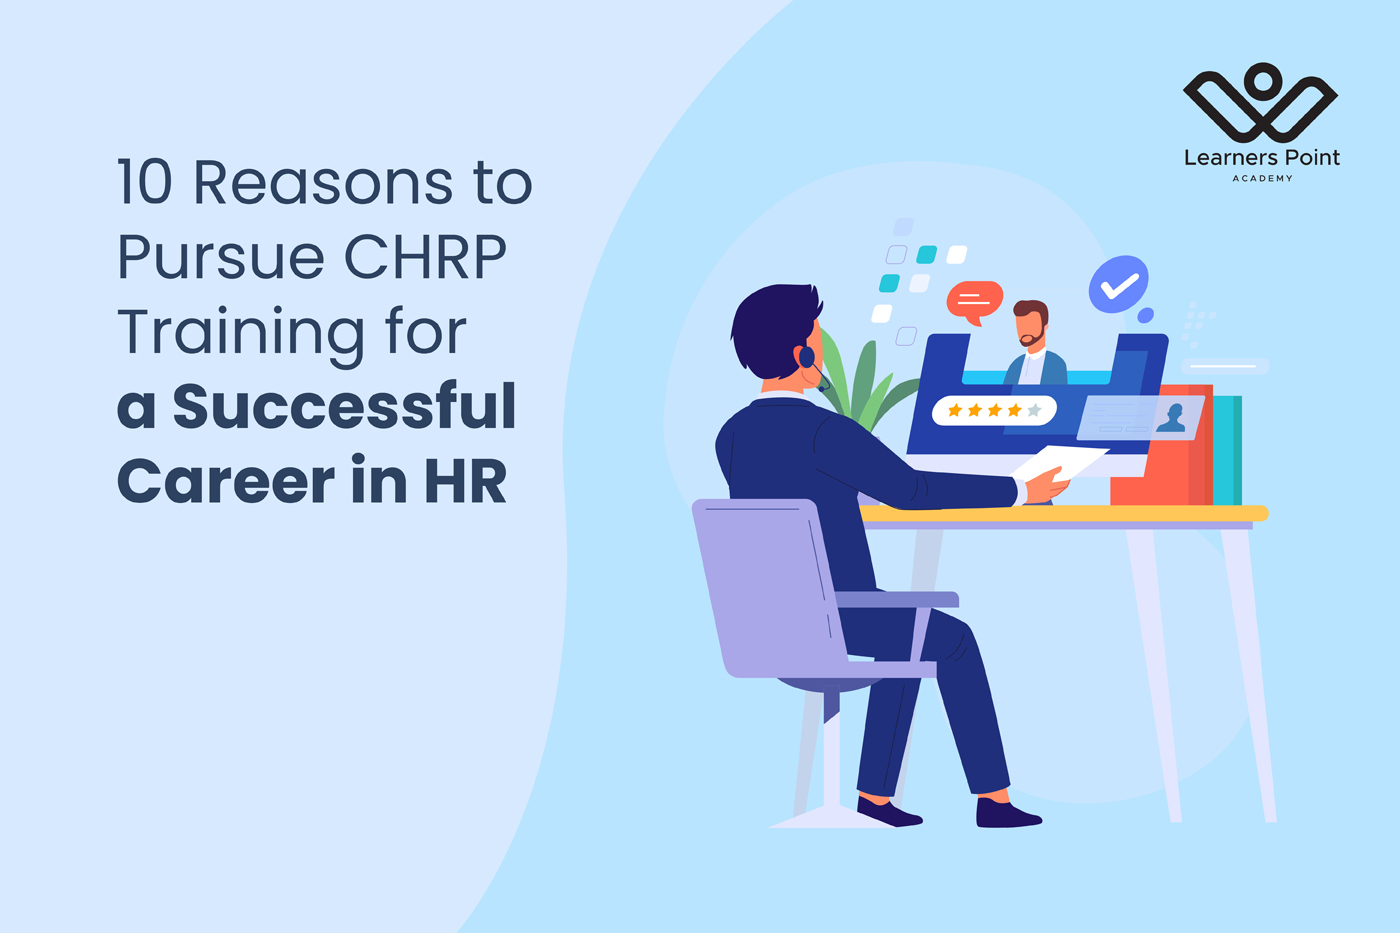 10 Reasons to Pursue CHRP Training for a Successful Career in HR